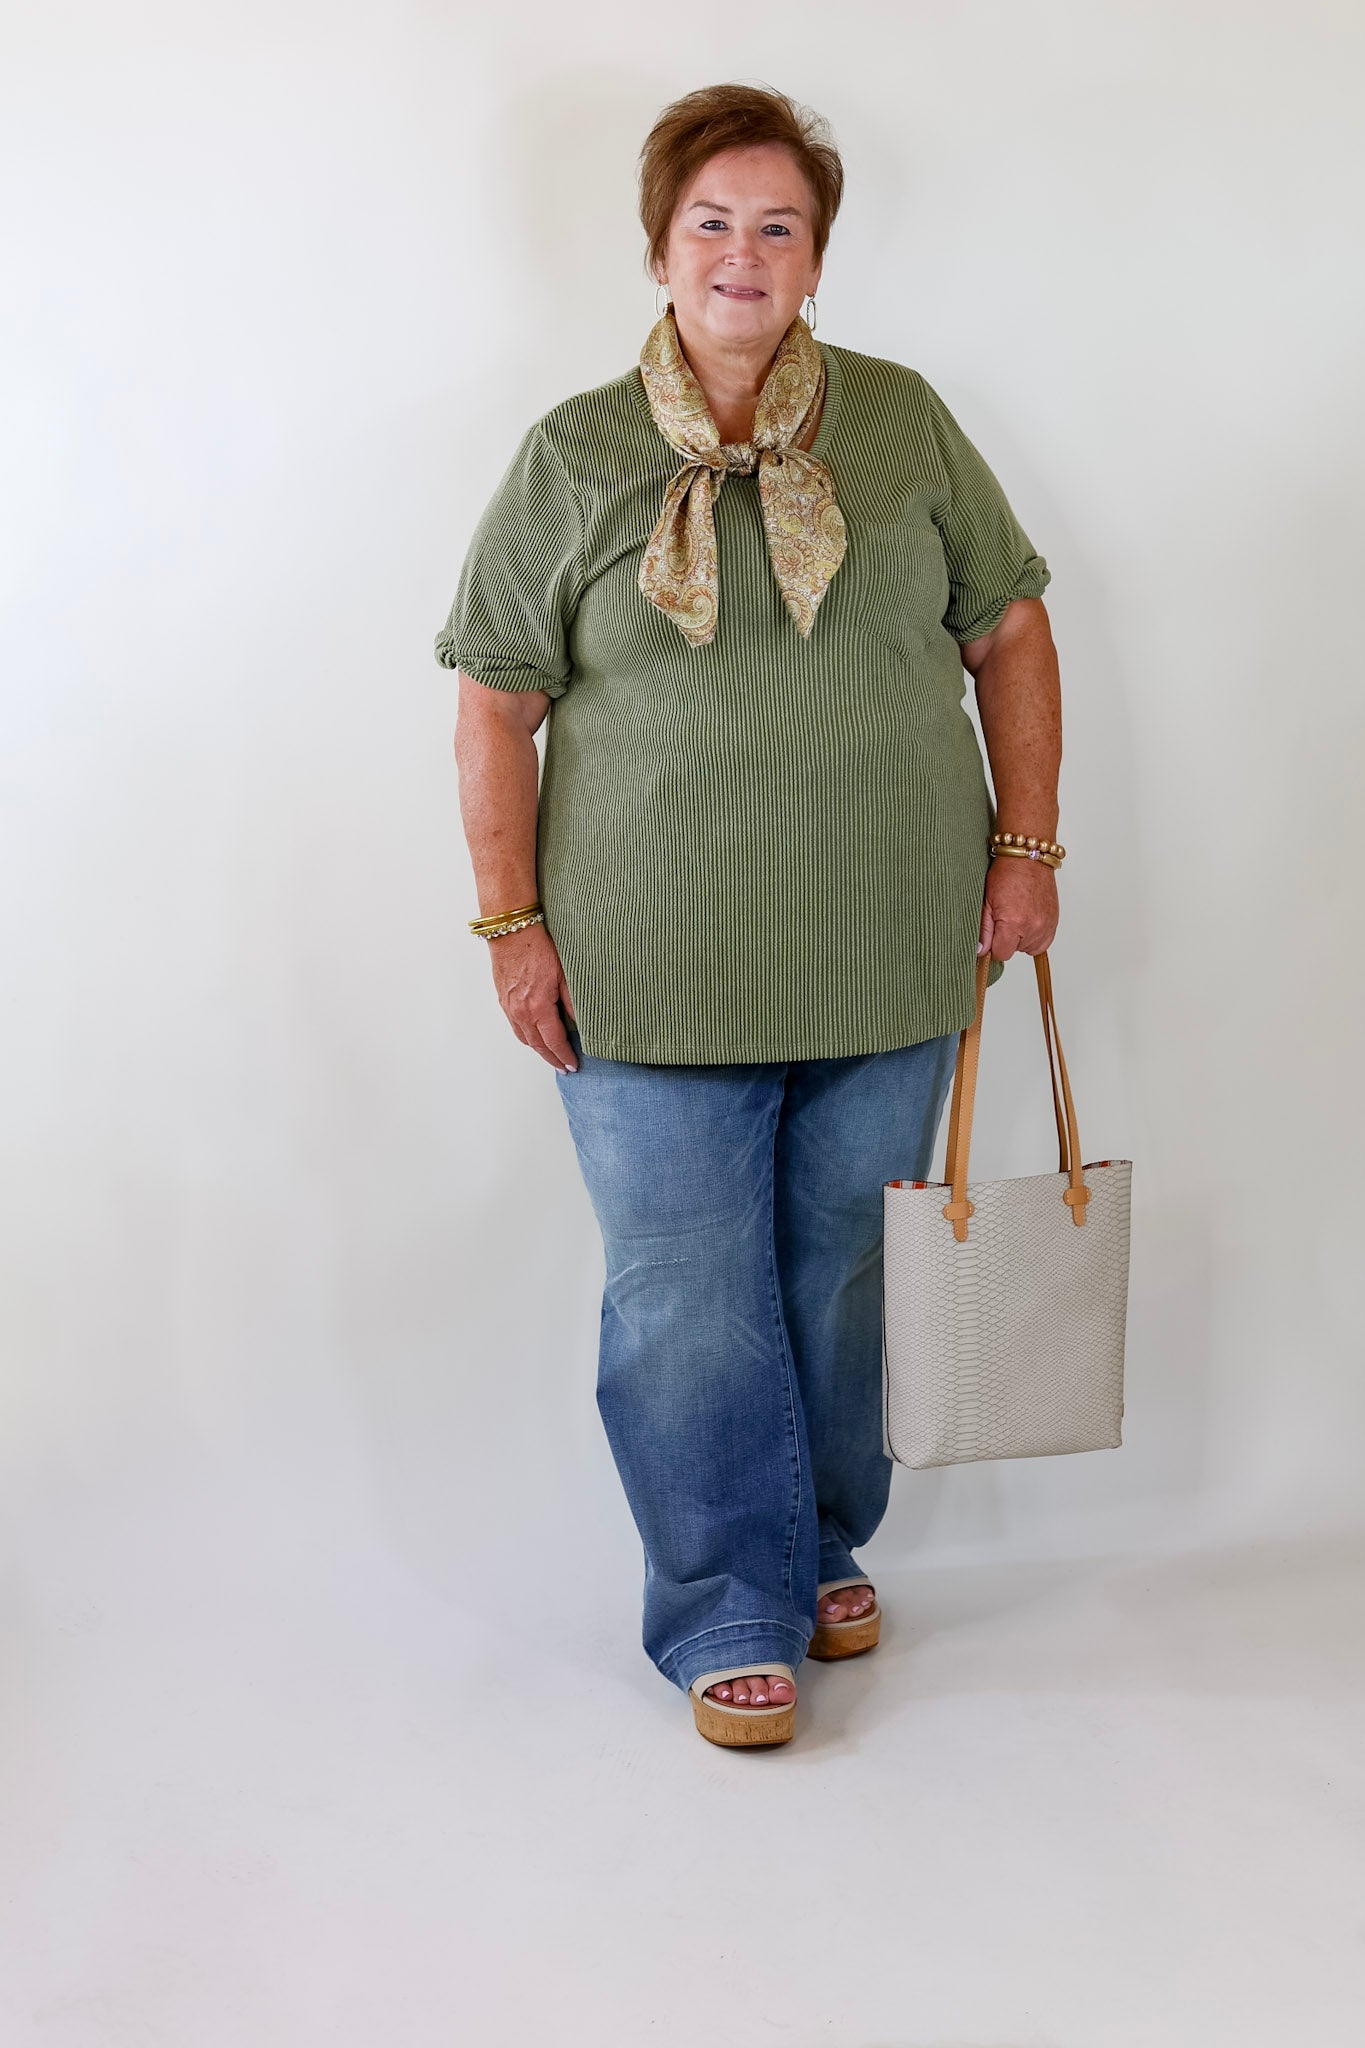 Only True Love Ribbed Short Sleeve Top with Front Pocket in Olive Green - Giddy Up Glamour Boutique